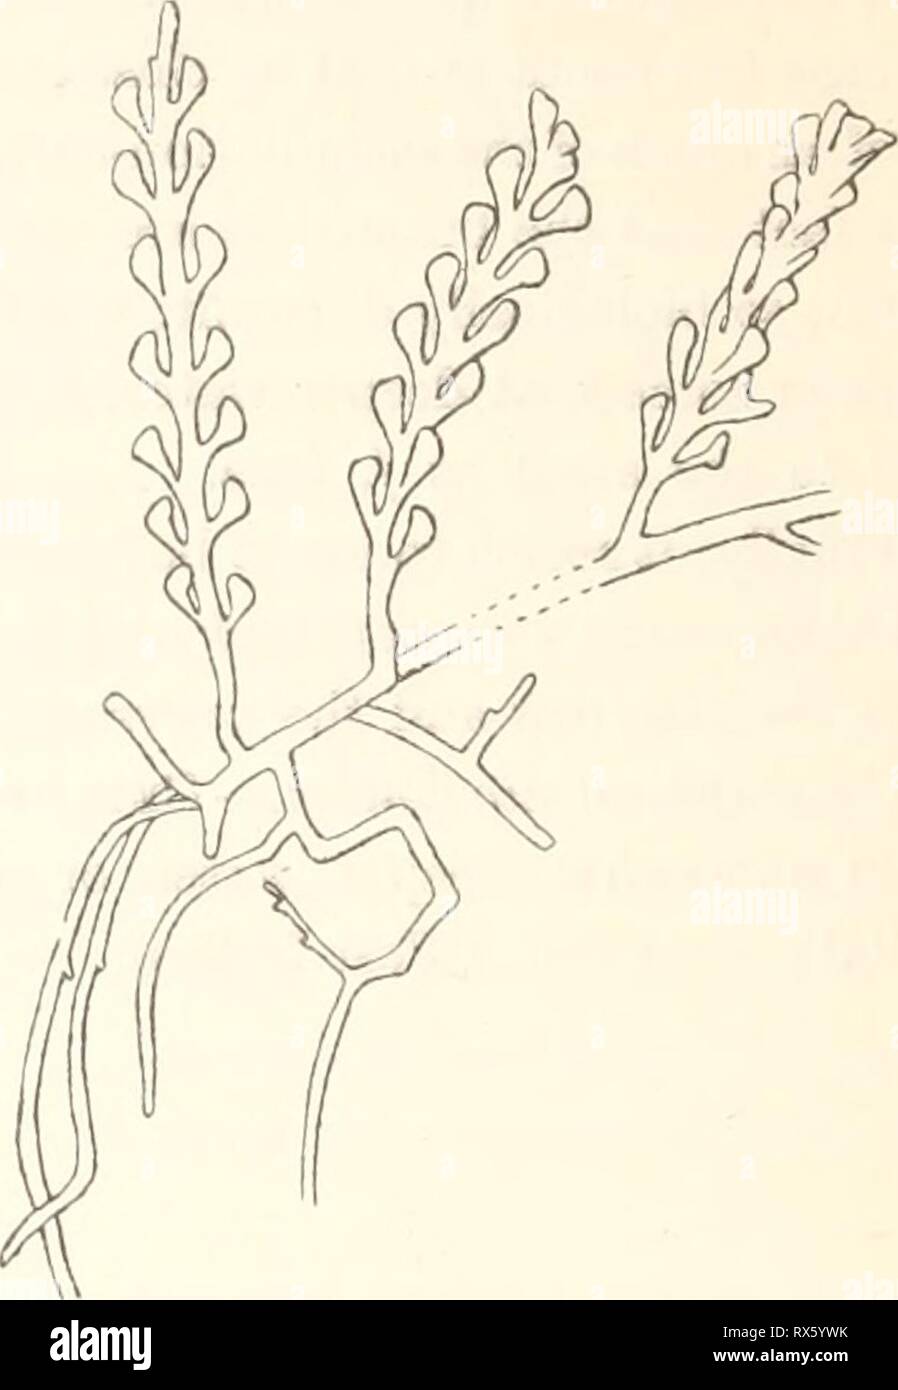 Ecological and systematic studies of Ecological and systematic studies of the Ceylon species of Caulerpa ecologicalsystem00unse Year: 1906  Fig. 24.—C. dichotoma n. sp. (2 x 1). Fig. 25.—C Lamourouxii (tttrn.) from Yemen coll. by MoNTAGNE- Specimen in the Herb, in the R. Kiksmuseum in Stockholm. (1 X 1). This Caulerpa is without any doubt nearly related to both C. Icetevirens and such types as corynephora or Zeyheri. The correspondence with C. Icetevirens, especially the /. laxa, shows itself in the simple pinnules, especially at the base, which also in /. laxa are somewhat flattened together  Stock Photo